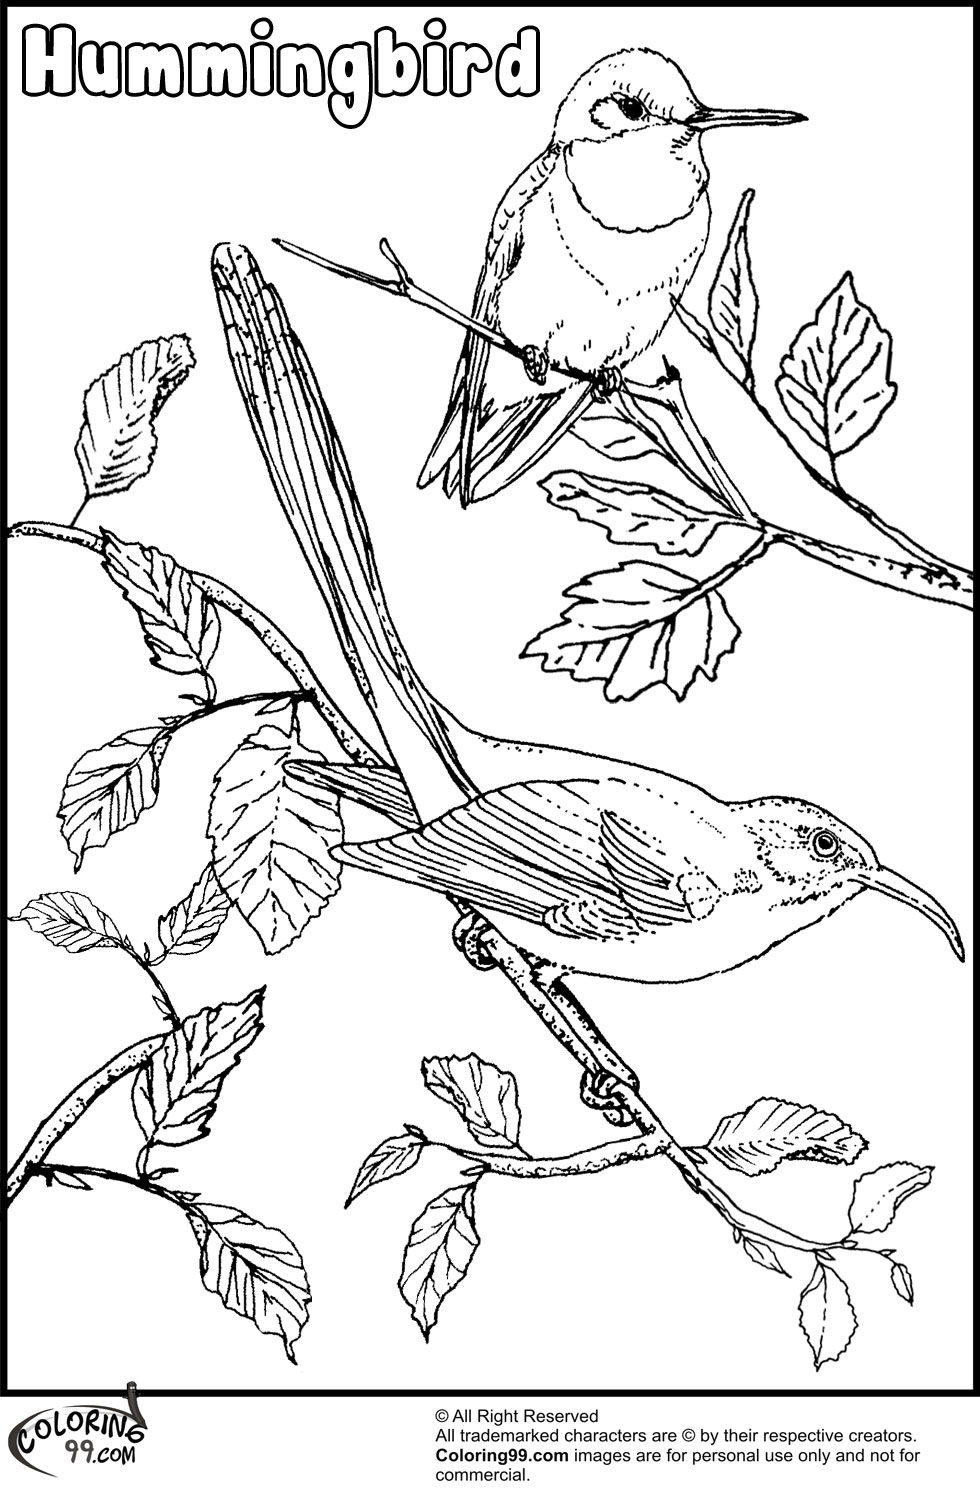 Download Hummingbird Coloring Pages | Minister Coloring